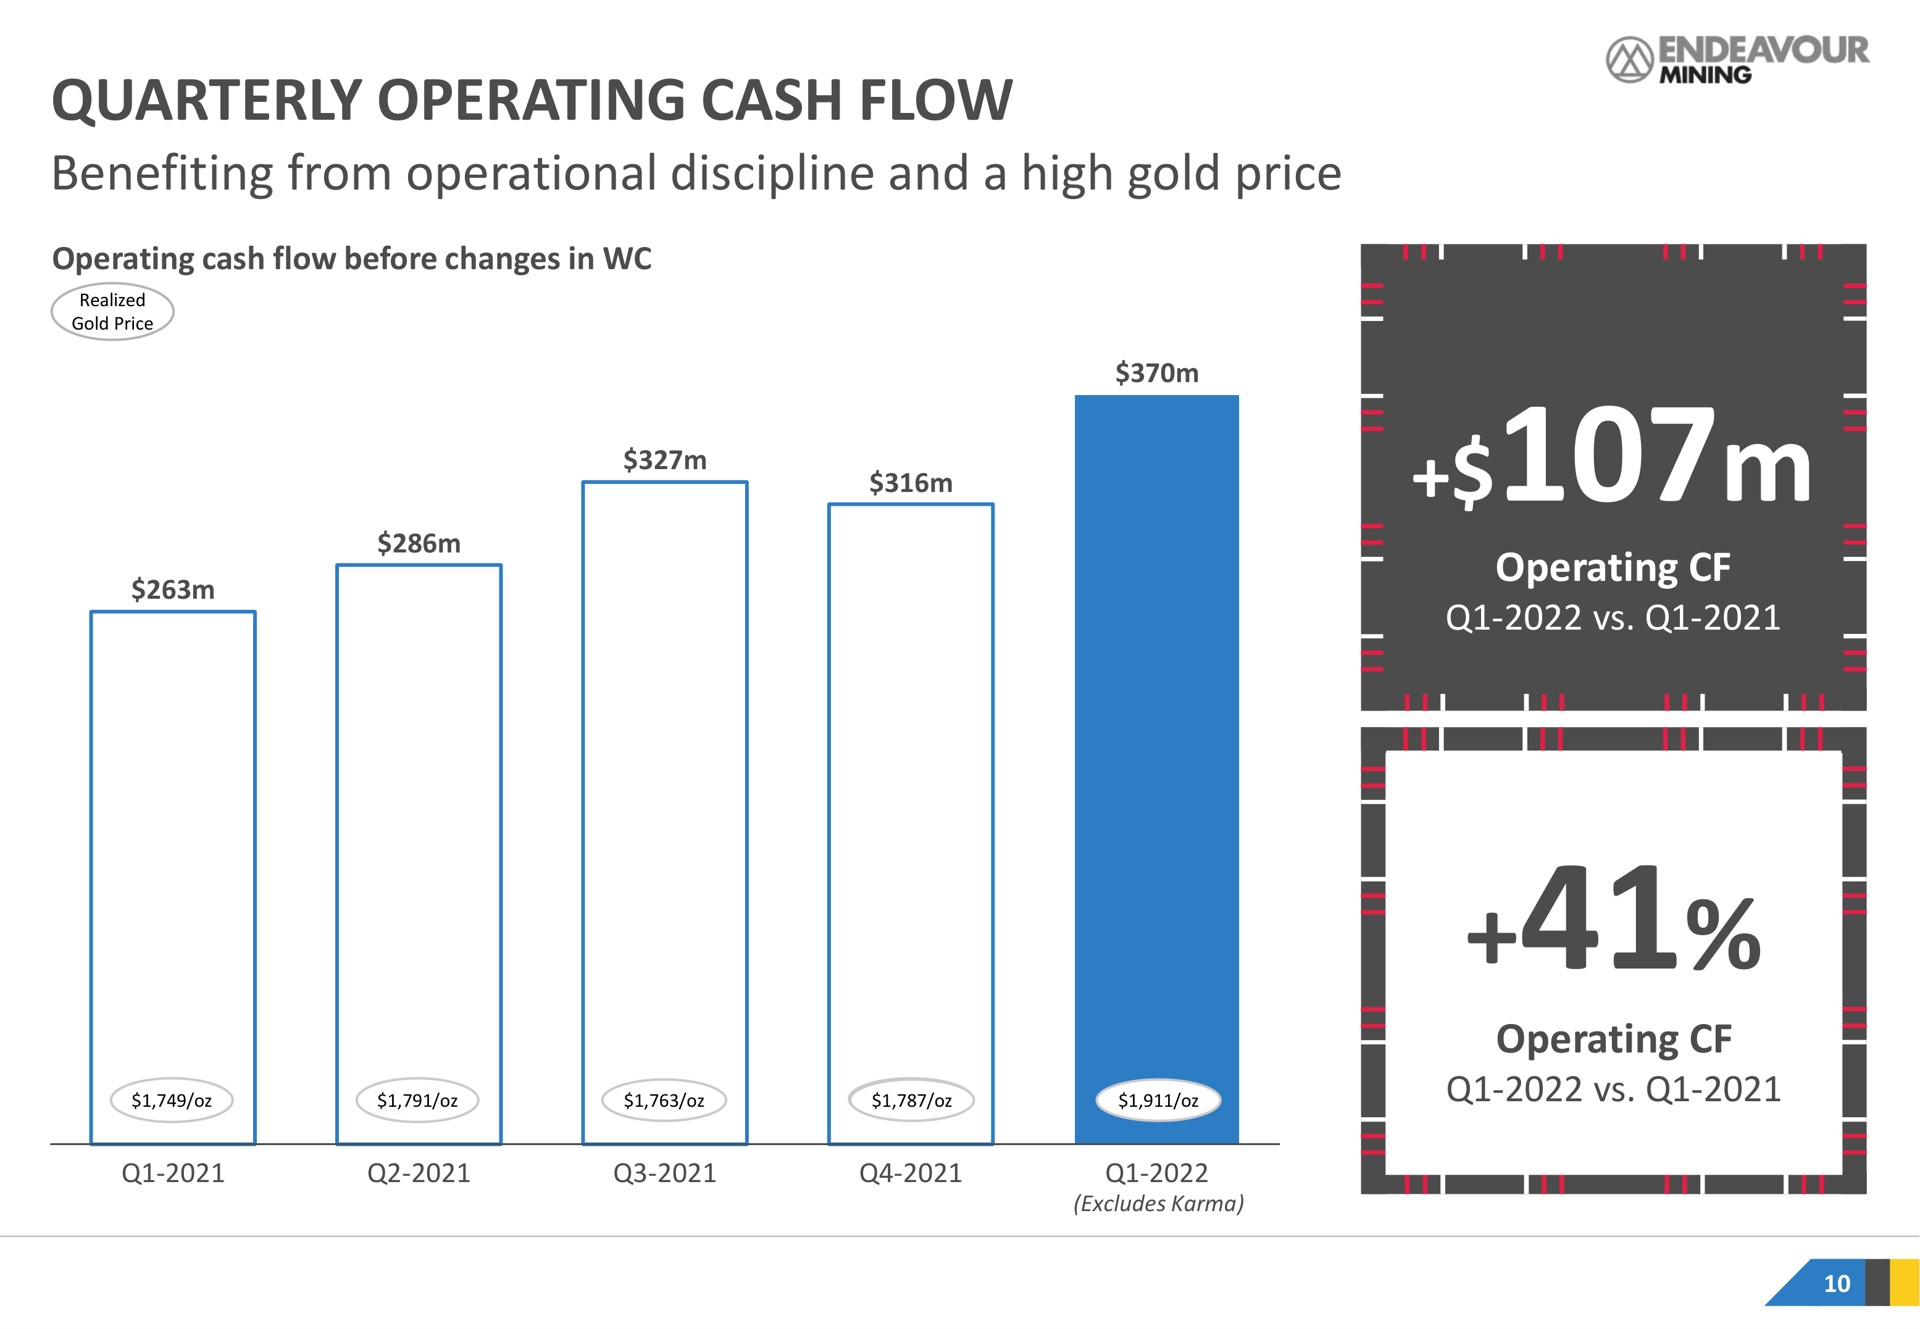 quarterly operating cash flow benefiting from operational discipline and a high gold price | Endeavour Mining